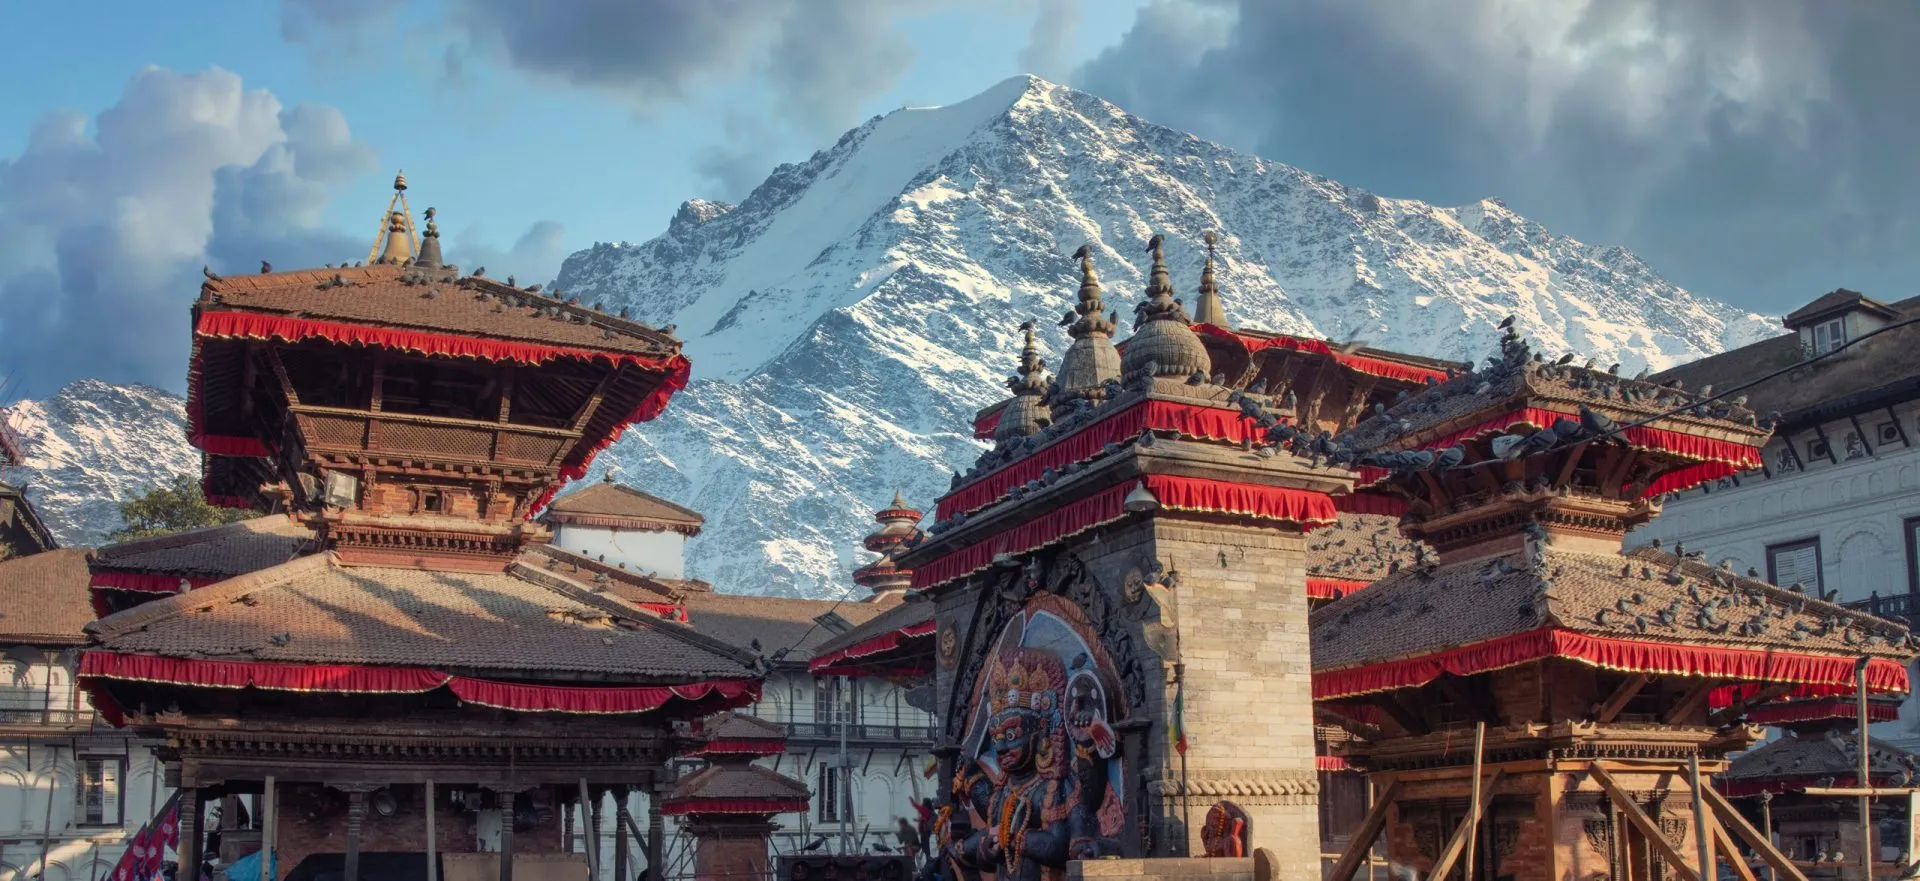 Explore the ancient city in the Kathmandu Valley